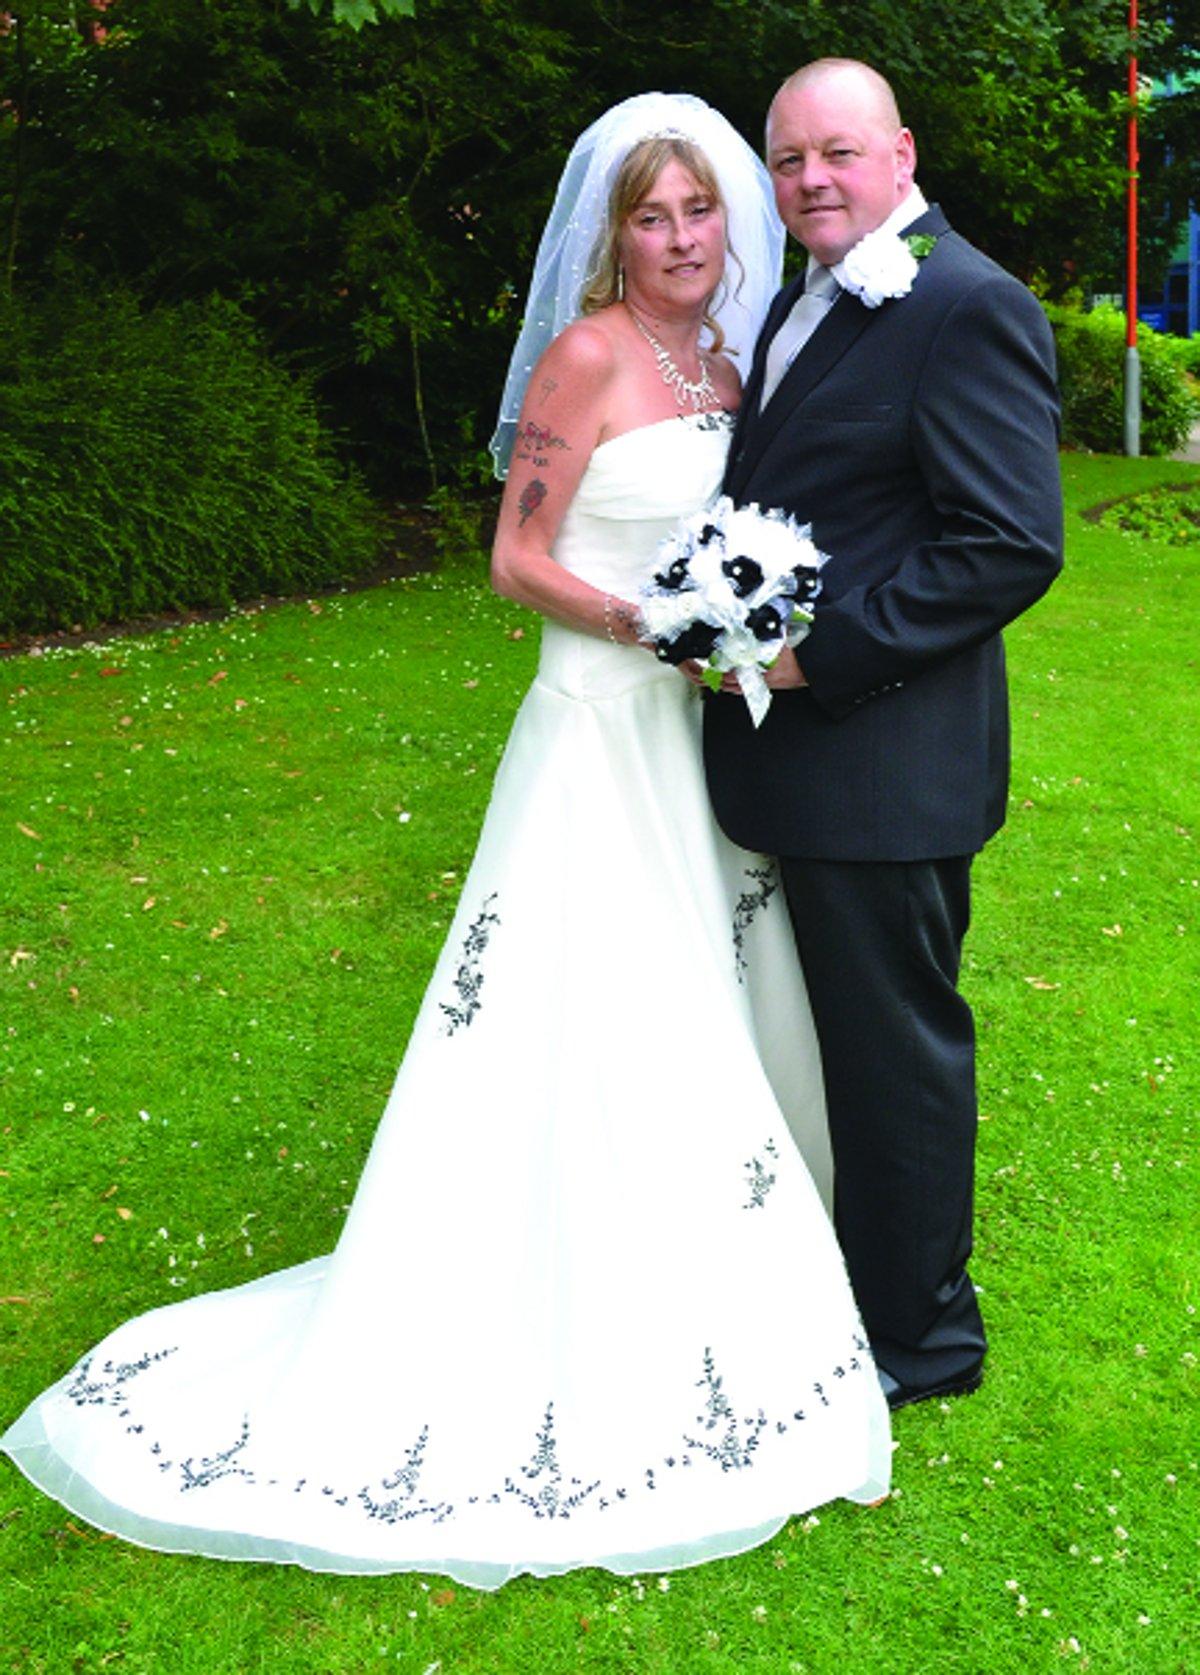 Send us your pictures to pcole@swindonadvertiser.co.uk
Kay Plank and Mark Dewhurst were married at Swindon Register Office Picture: A1 Photogenics